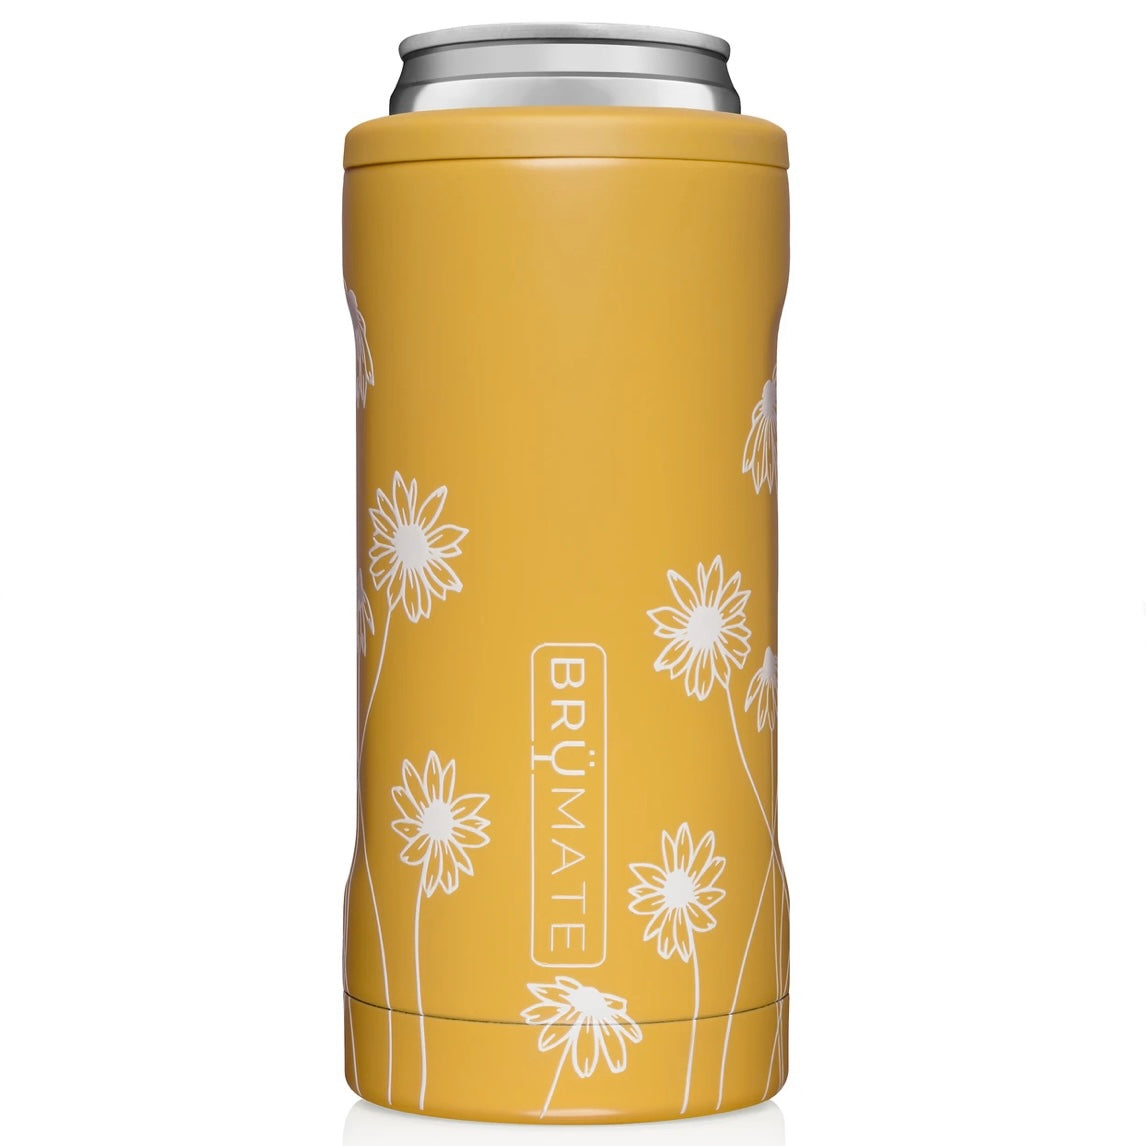 slim cans leak-proof drinkware hot to cold insulated drinkware tumbler like yeti brumate spillproof floral yellow silhouette